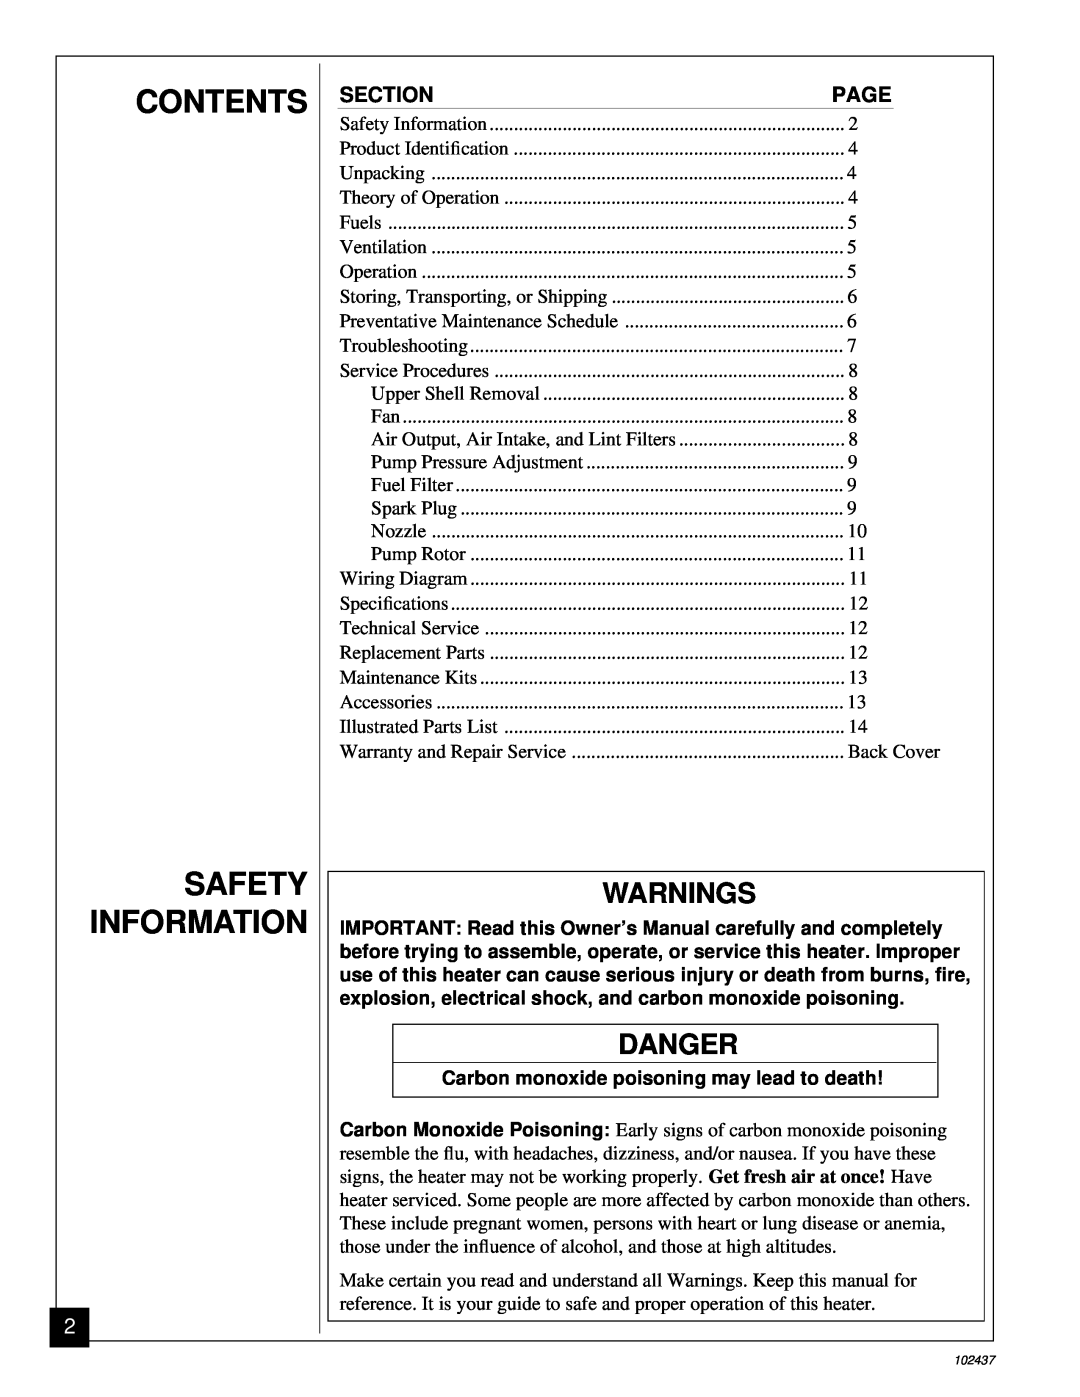 Desa PORTABLE FORCED AIR HEATERS owner manual Contents, Safety Information, Warnings, Danger, Section, Page 